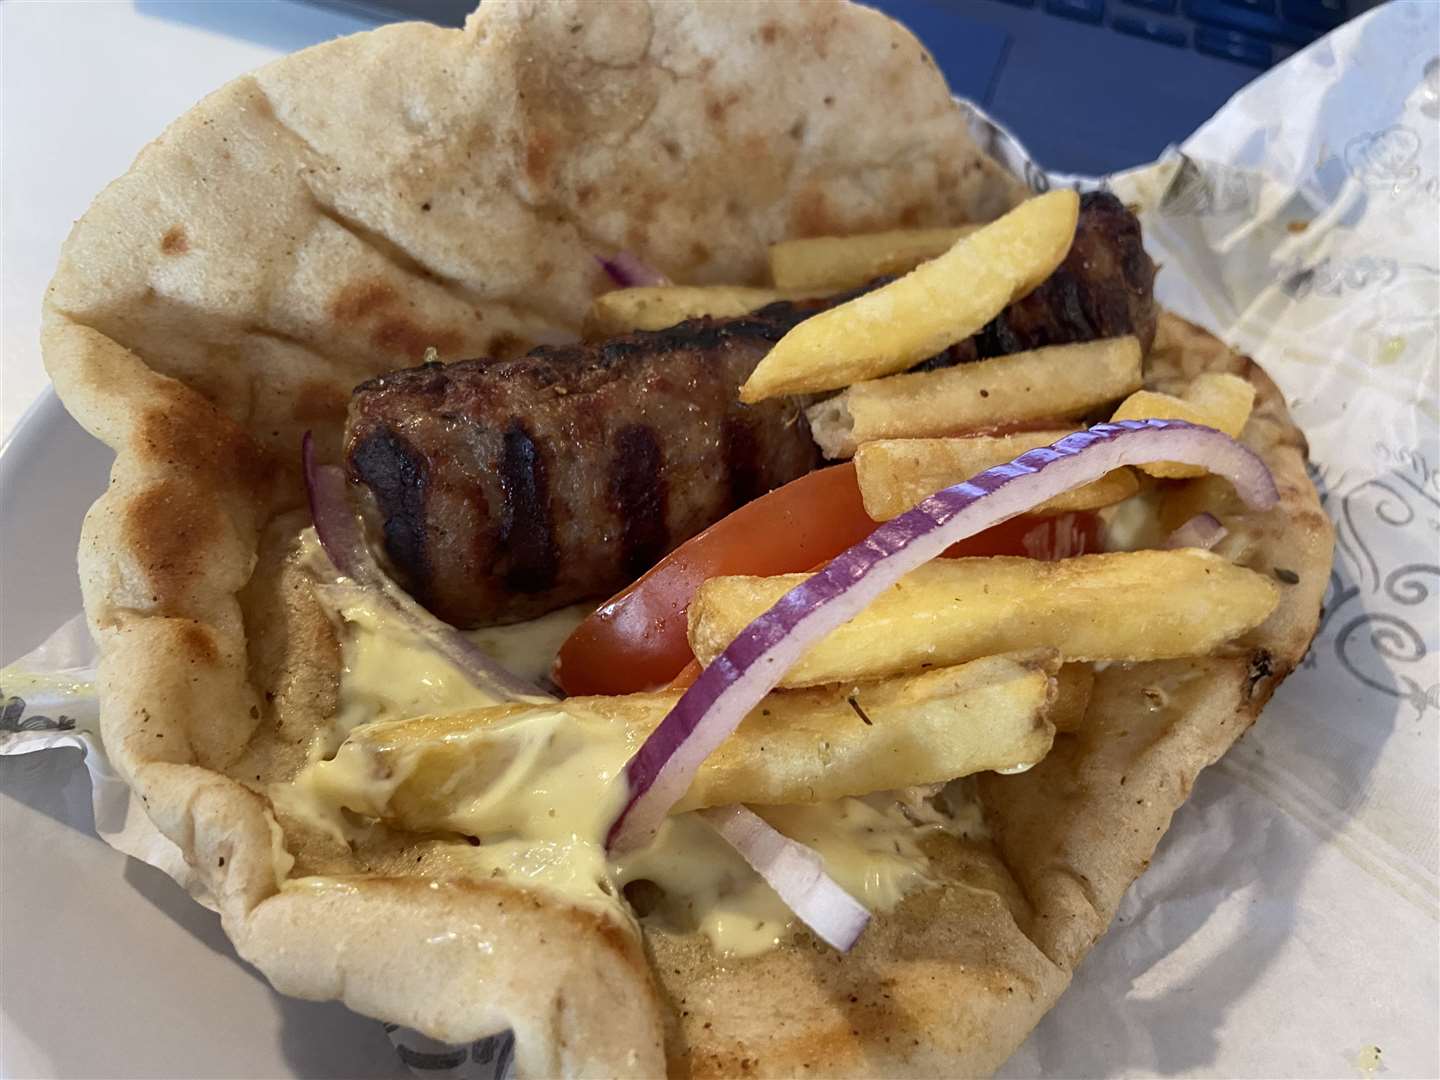 The 'Greek' kebab, which came stuffed with Philadelphia cheese